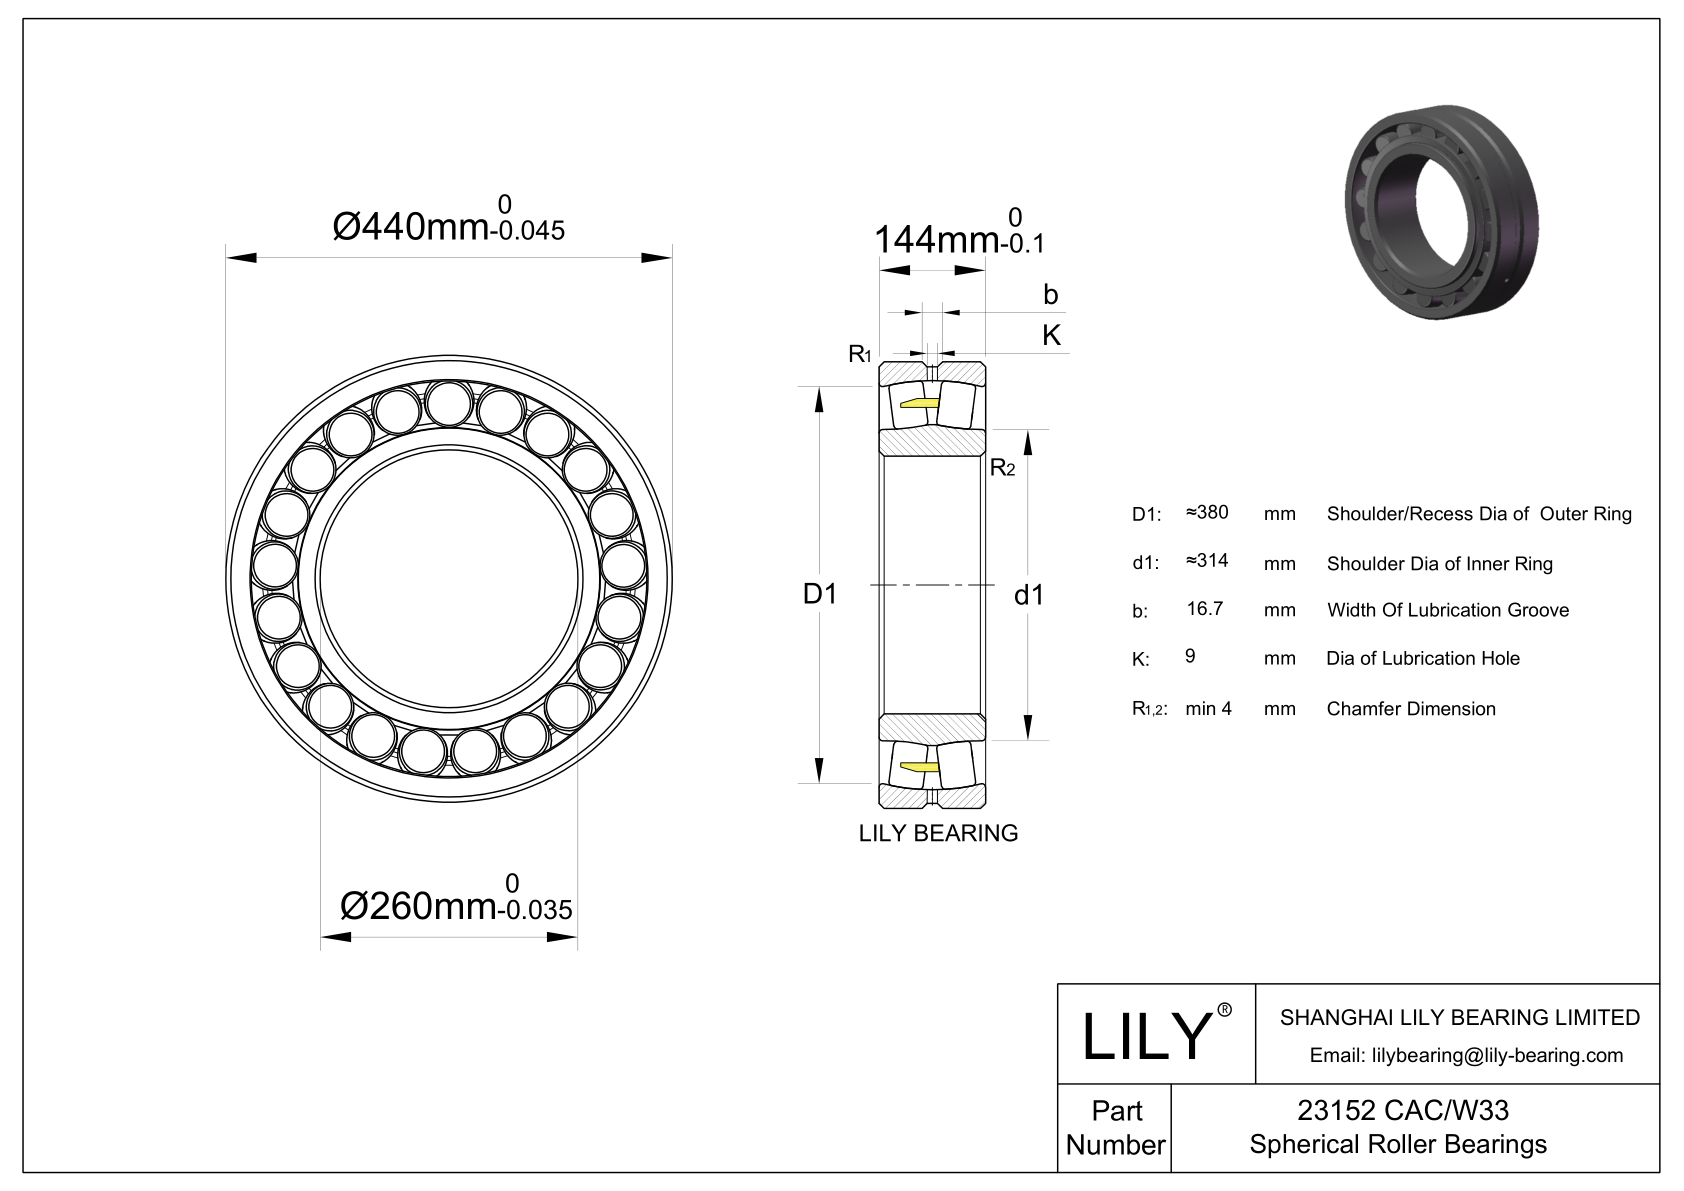 23152 CAC/W33 Double Row Spherical Roller Bearing cad drawing